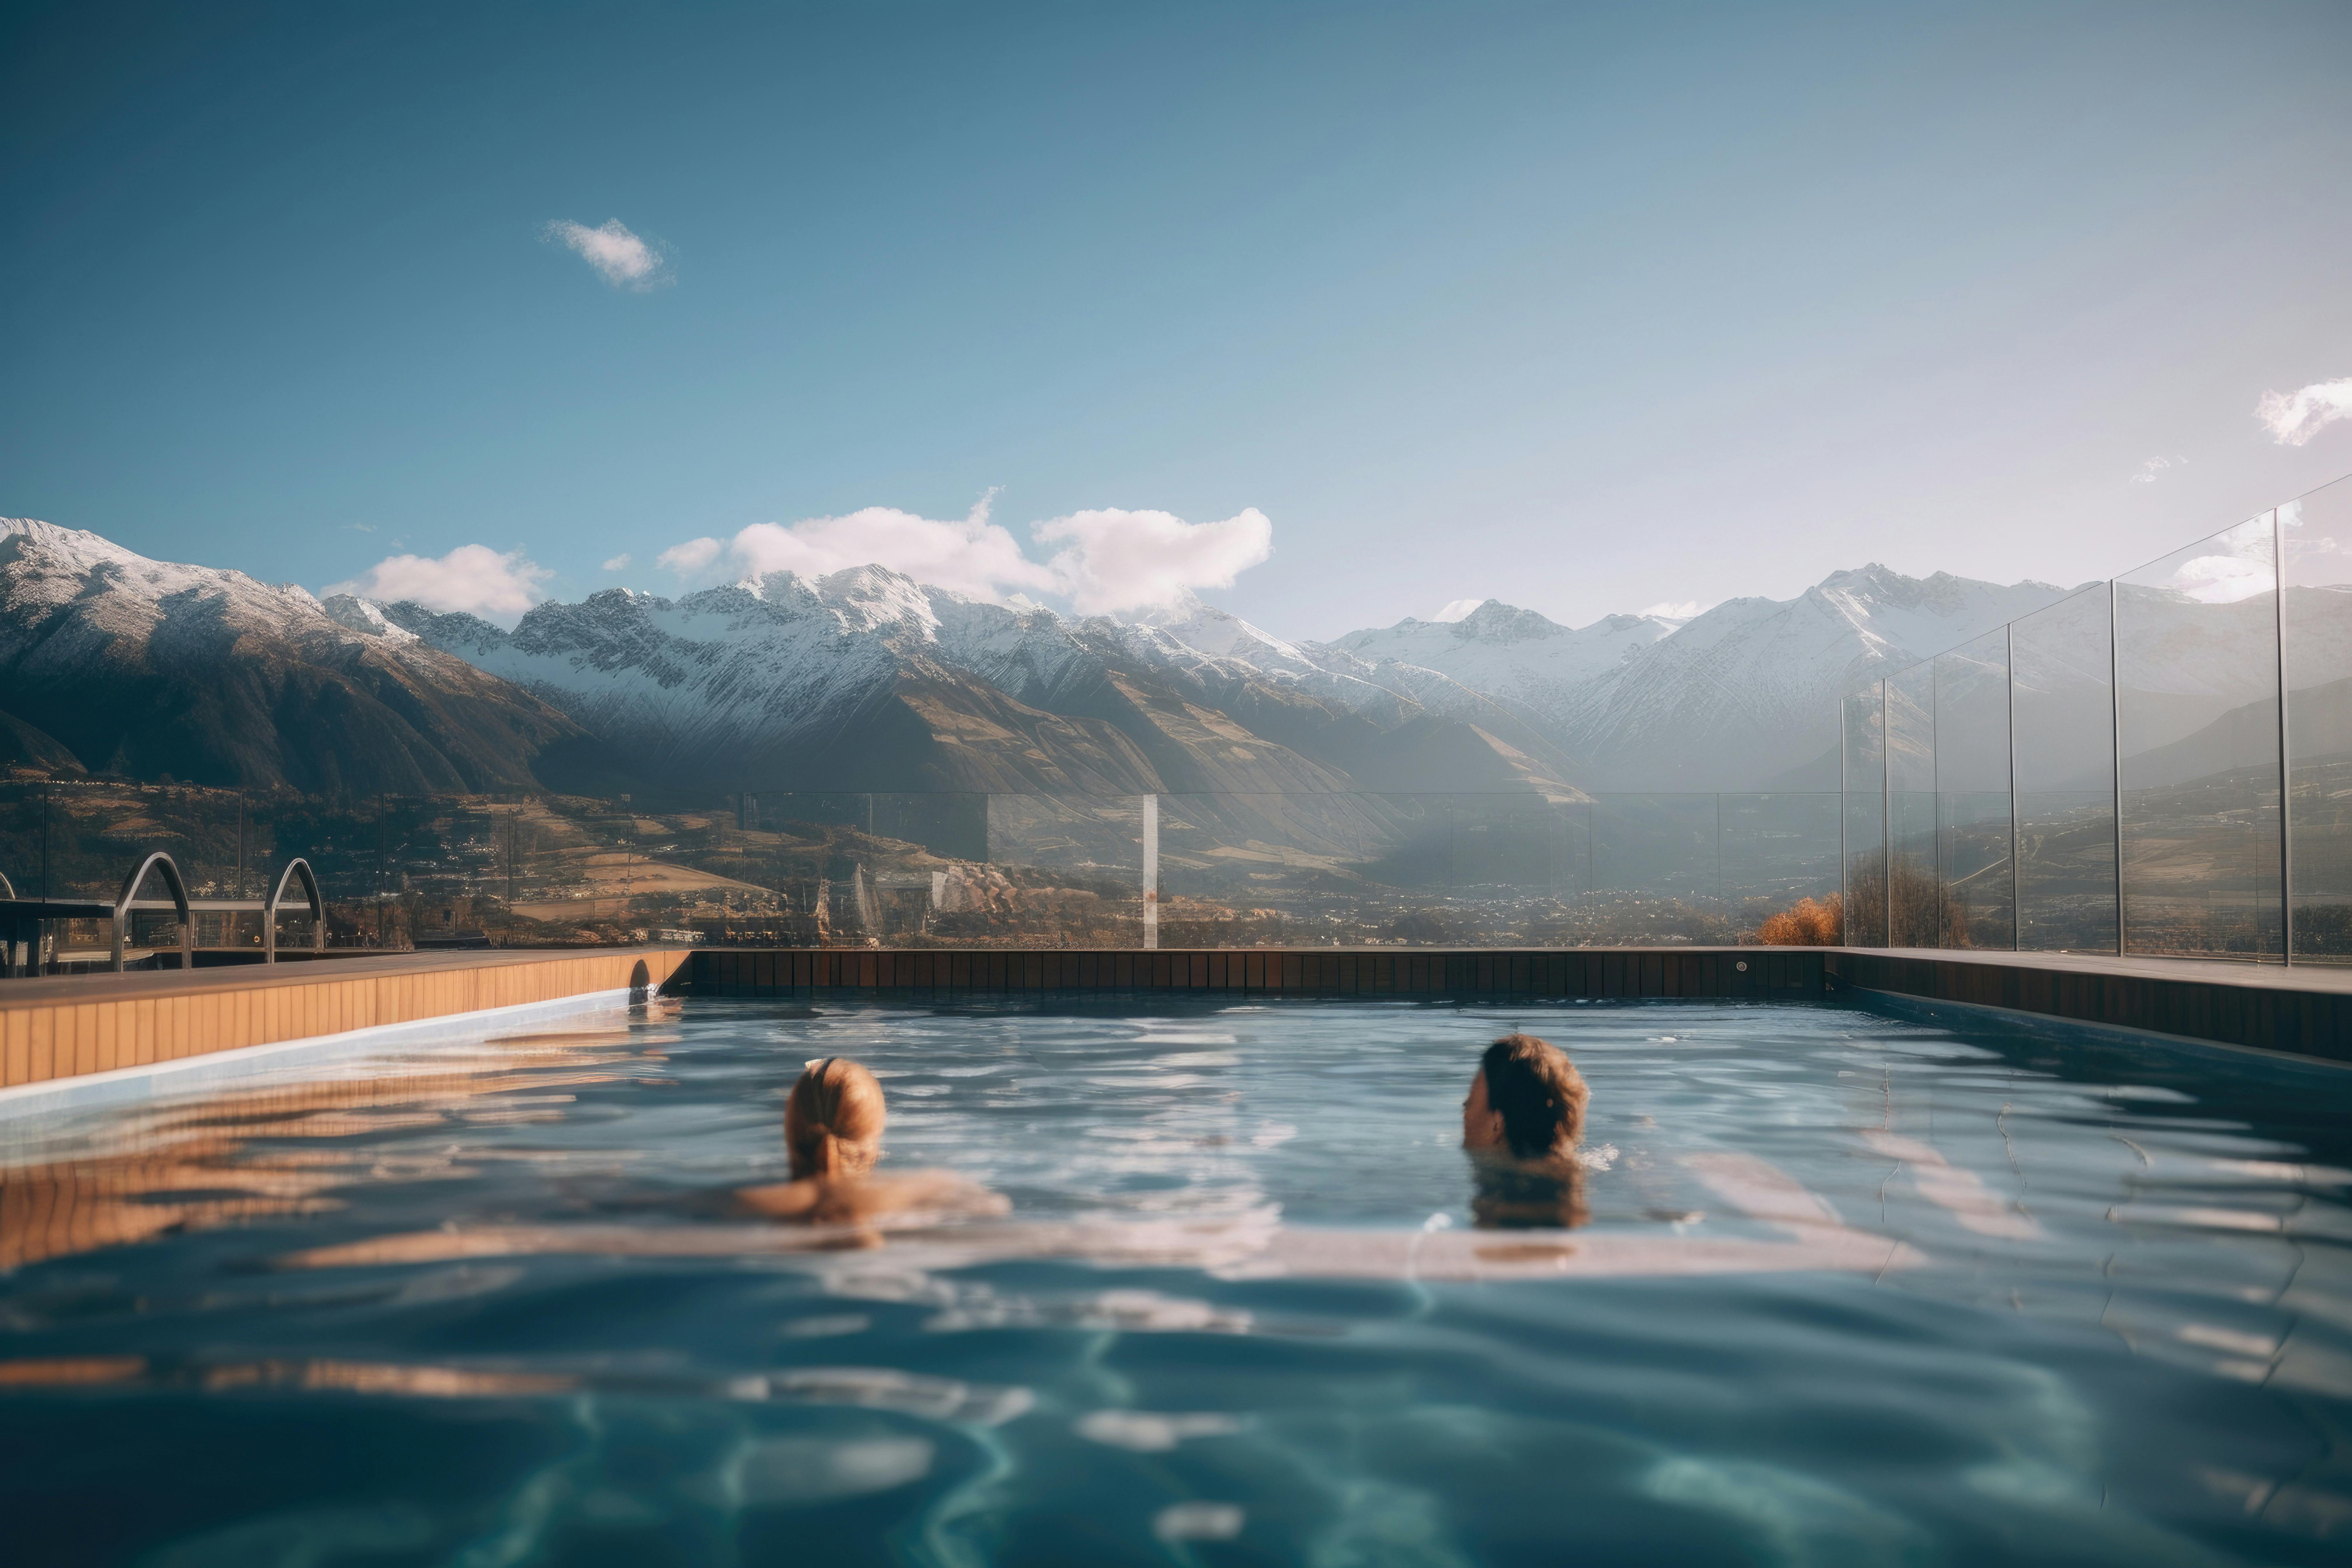 Two people swimming in a pool with mountains in the background.